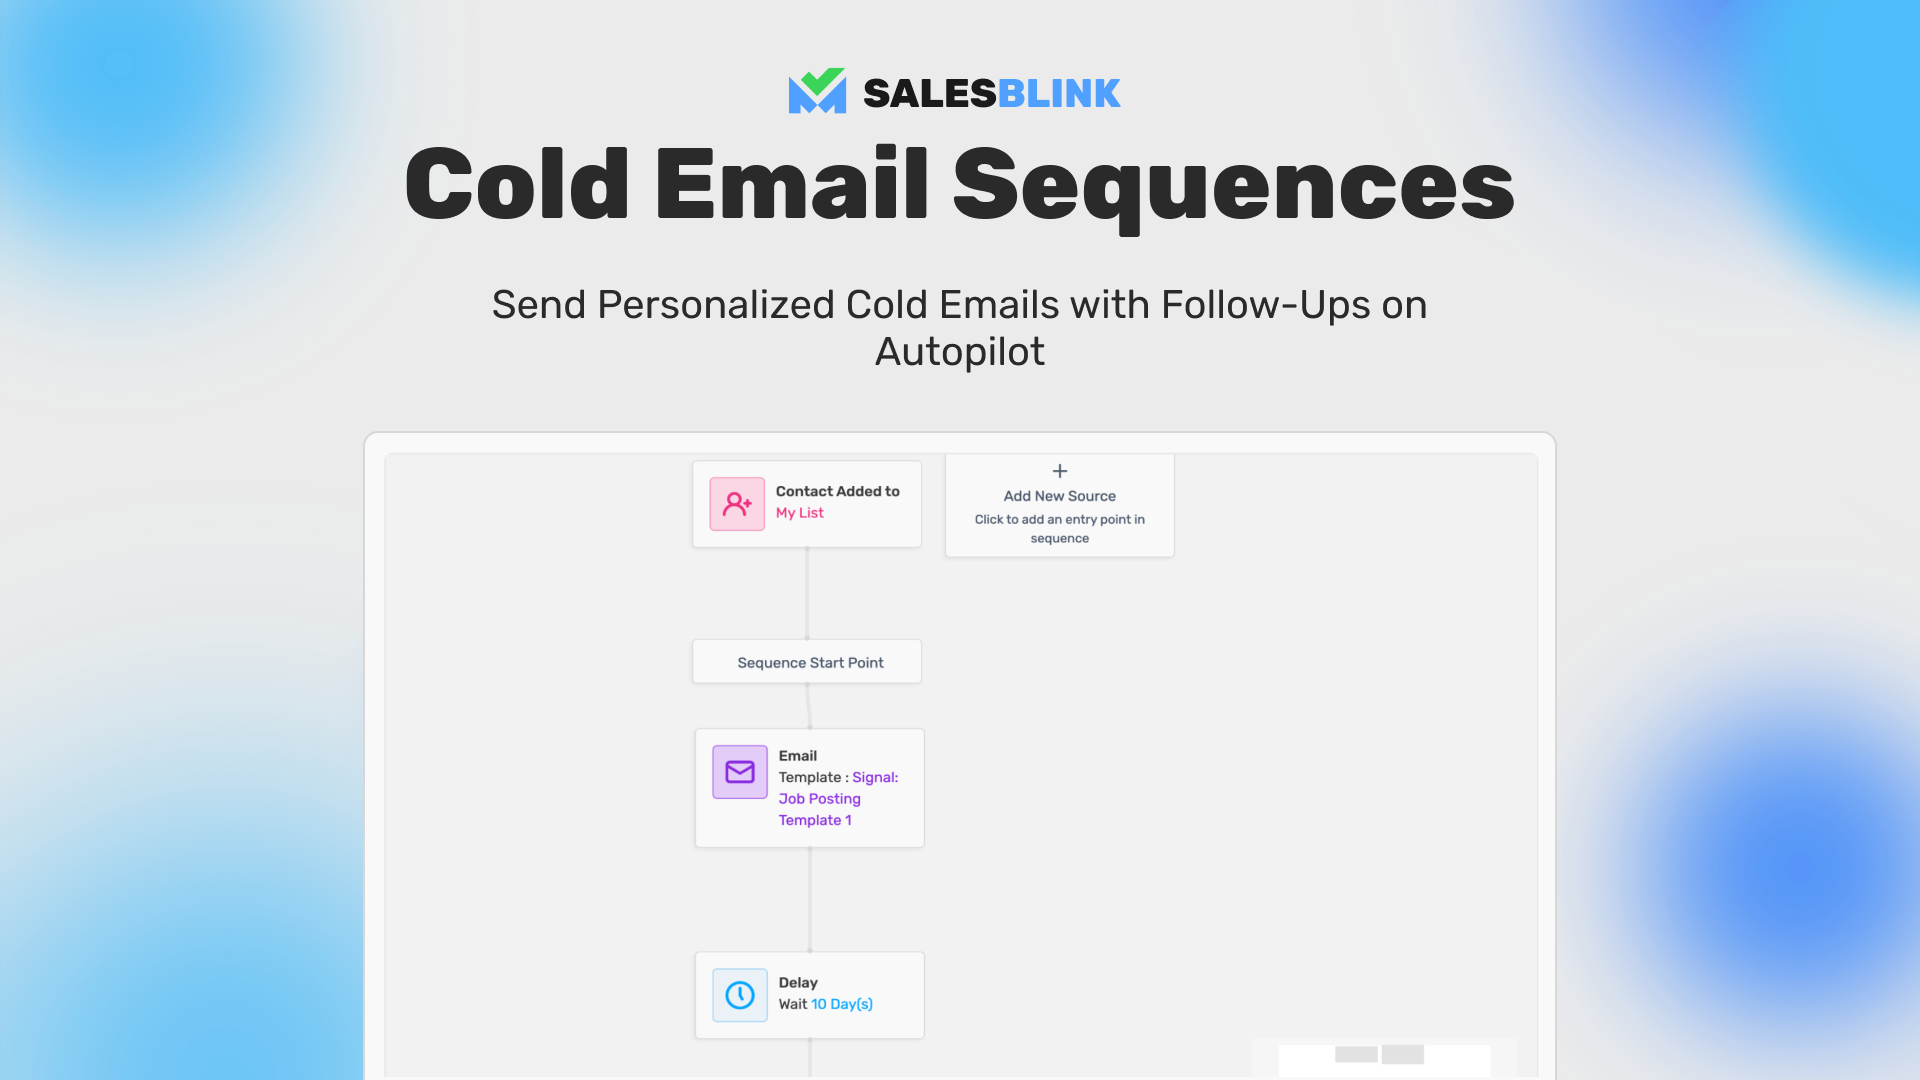 Launch Cold Email Sequences with followups on Autopilot